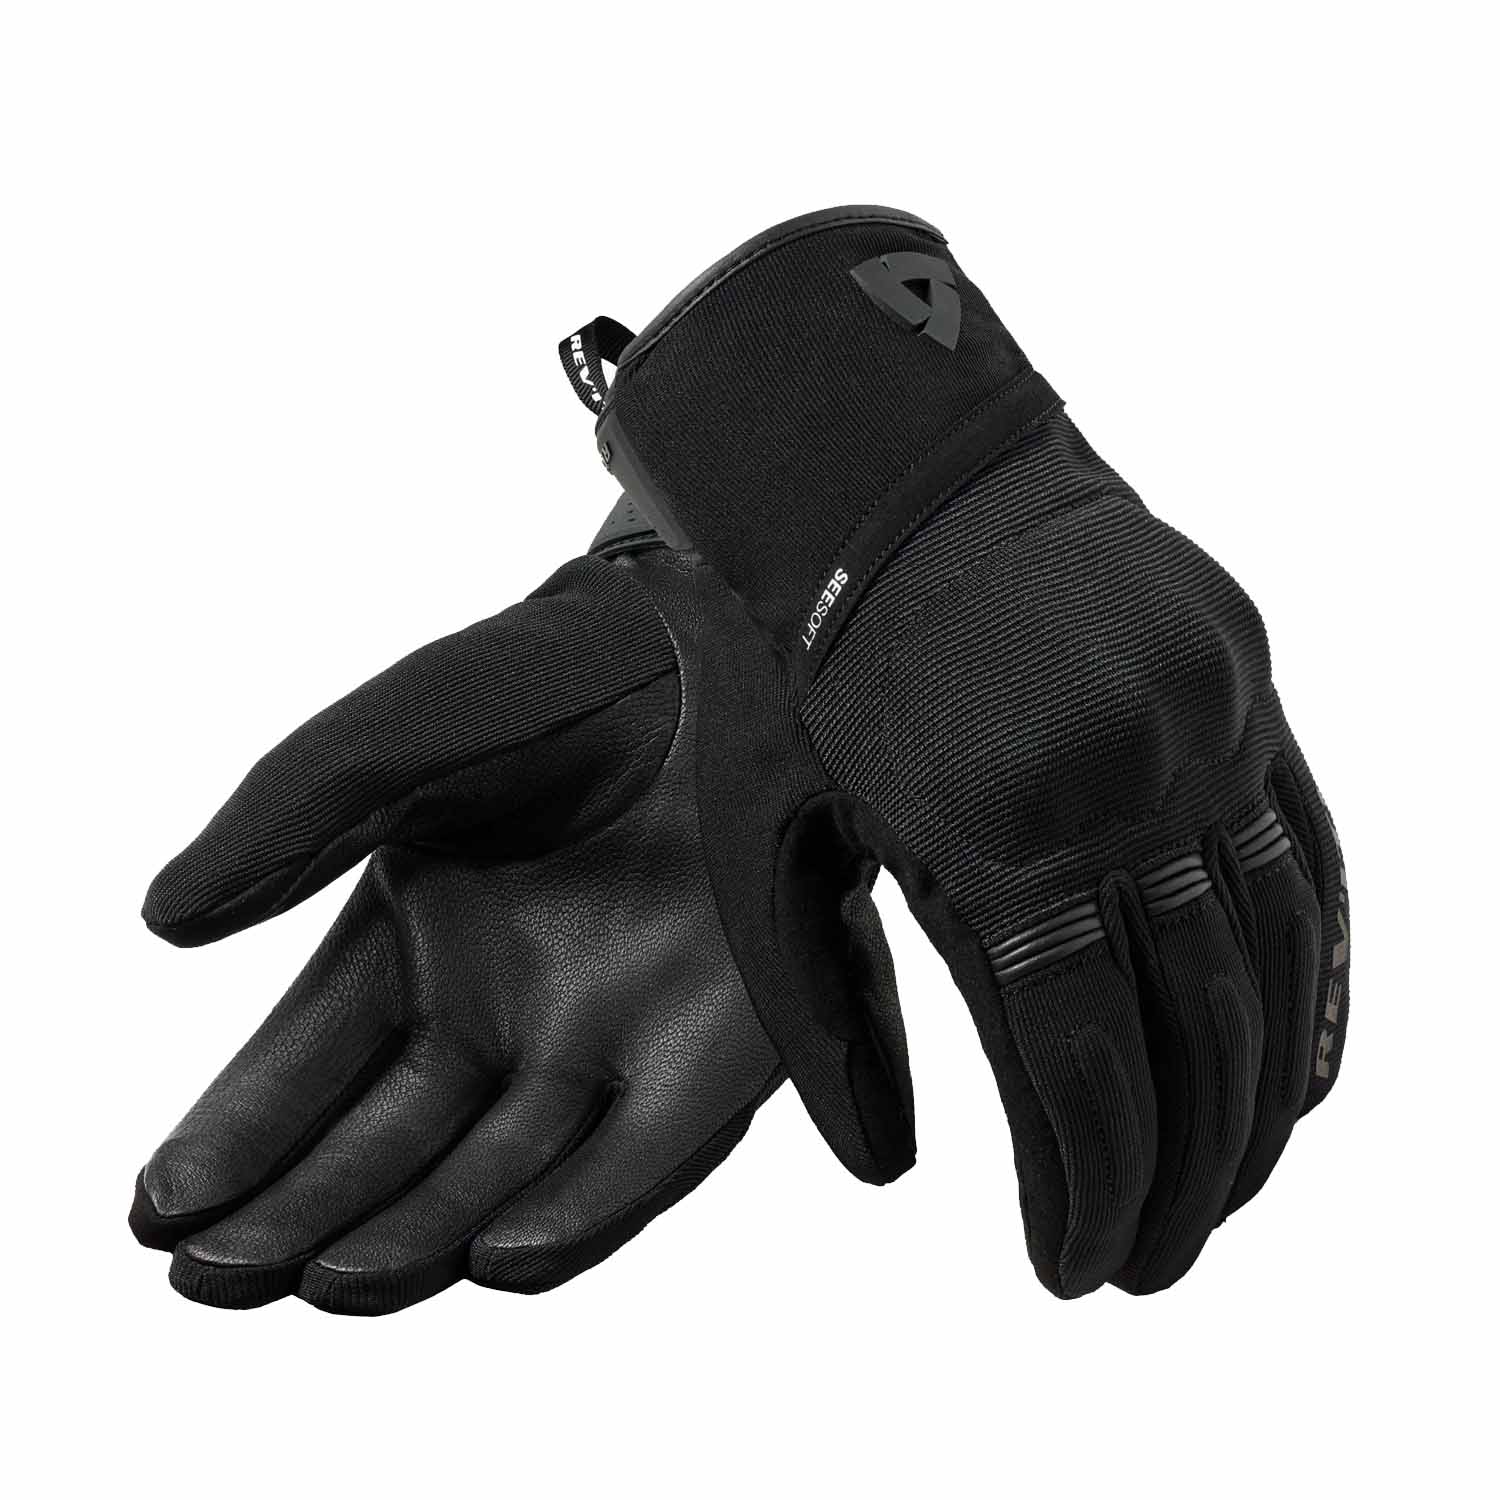 Image of EU REV'IT! Mosca 2 H2O Gloves Black Taille XS